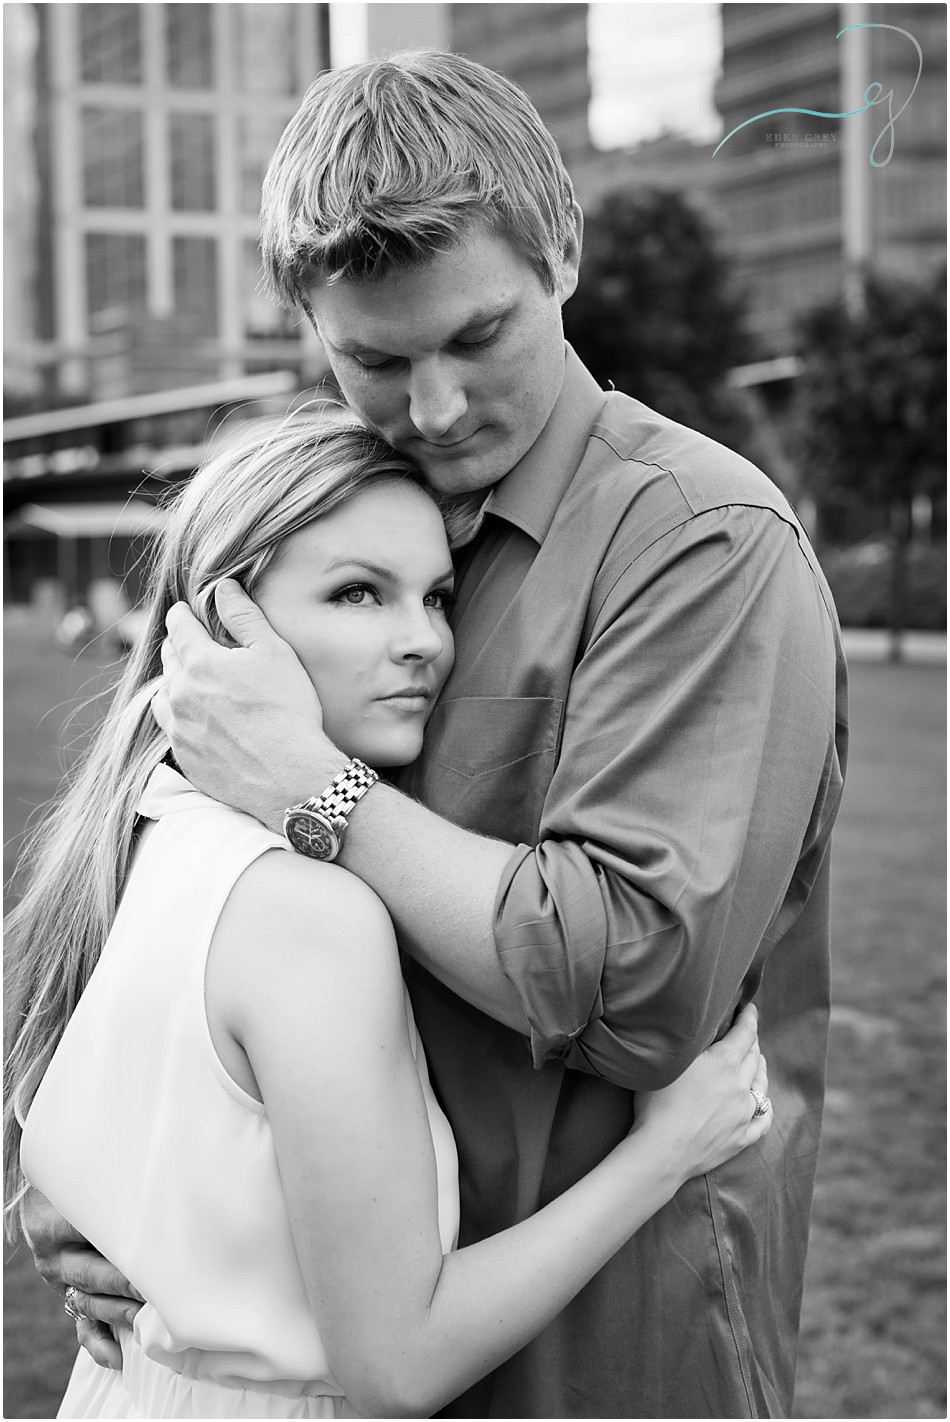 Taking Engagement Pictures in Houston, Texas